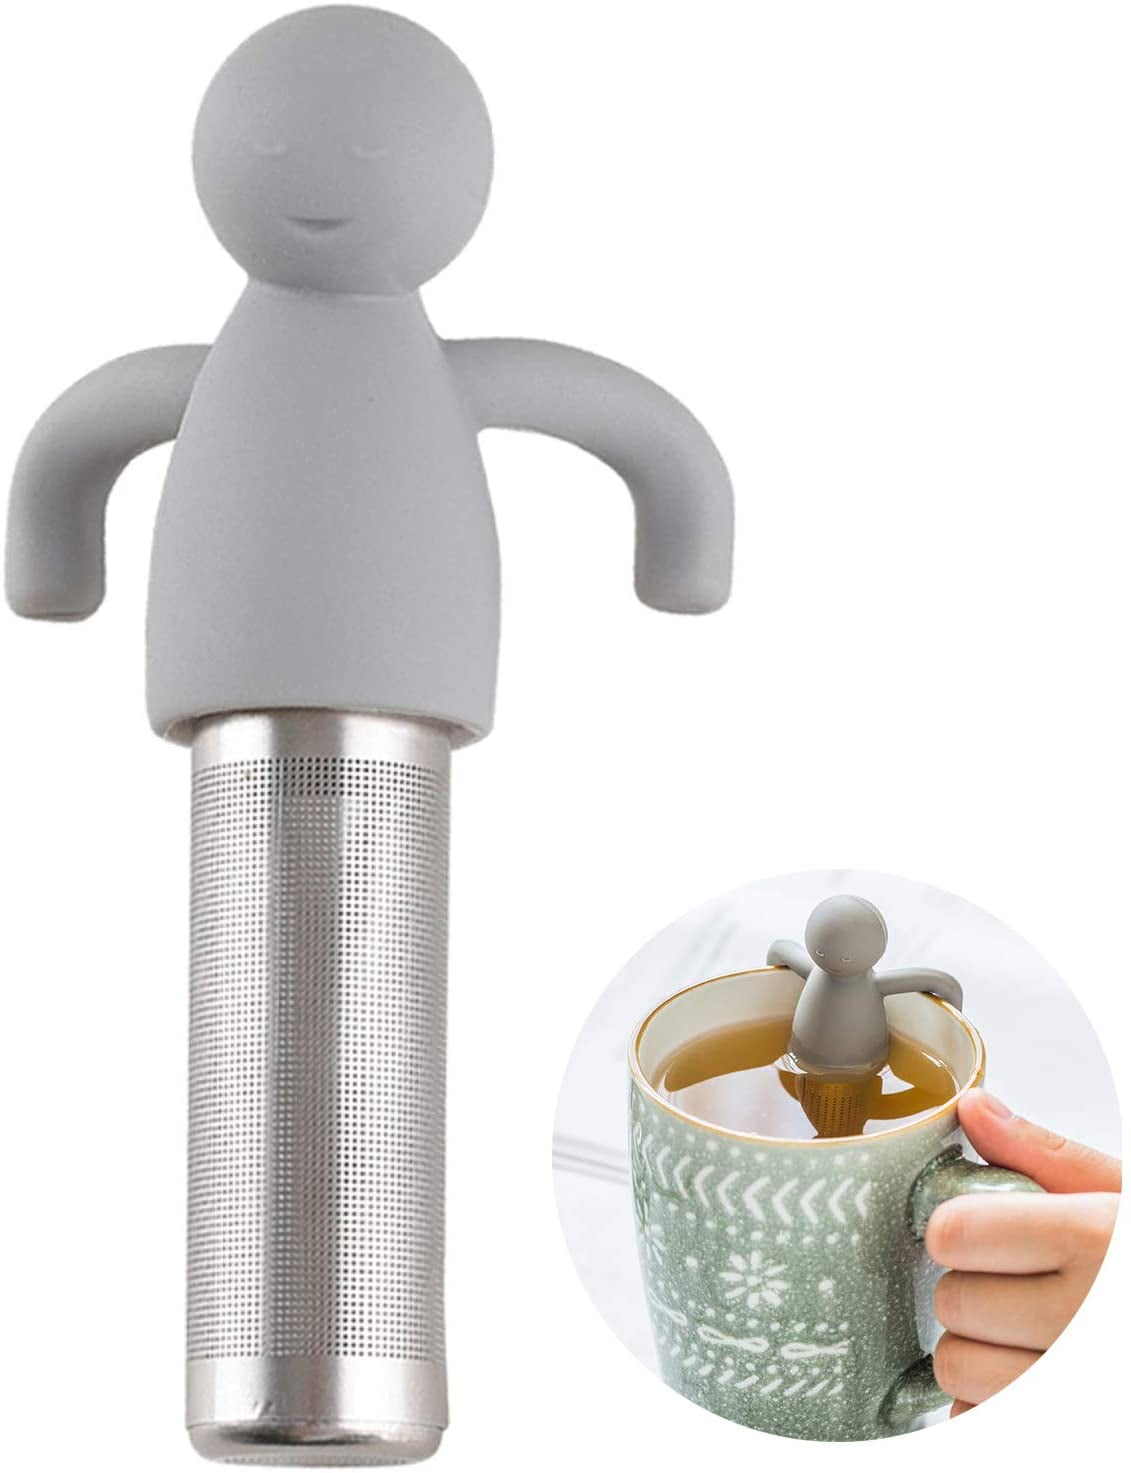 Yoassi Extra Fine 18/8 Stainless Steel Tea Infuser Mesh Strainer with Large  Capacity & Perfect Size Double Handles for Hanging on Teapots, Mugs, Cups